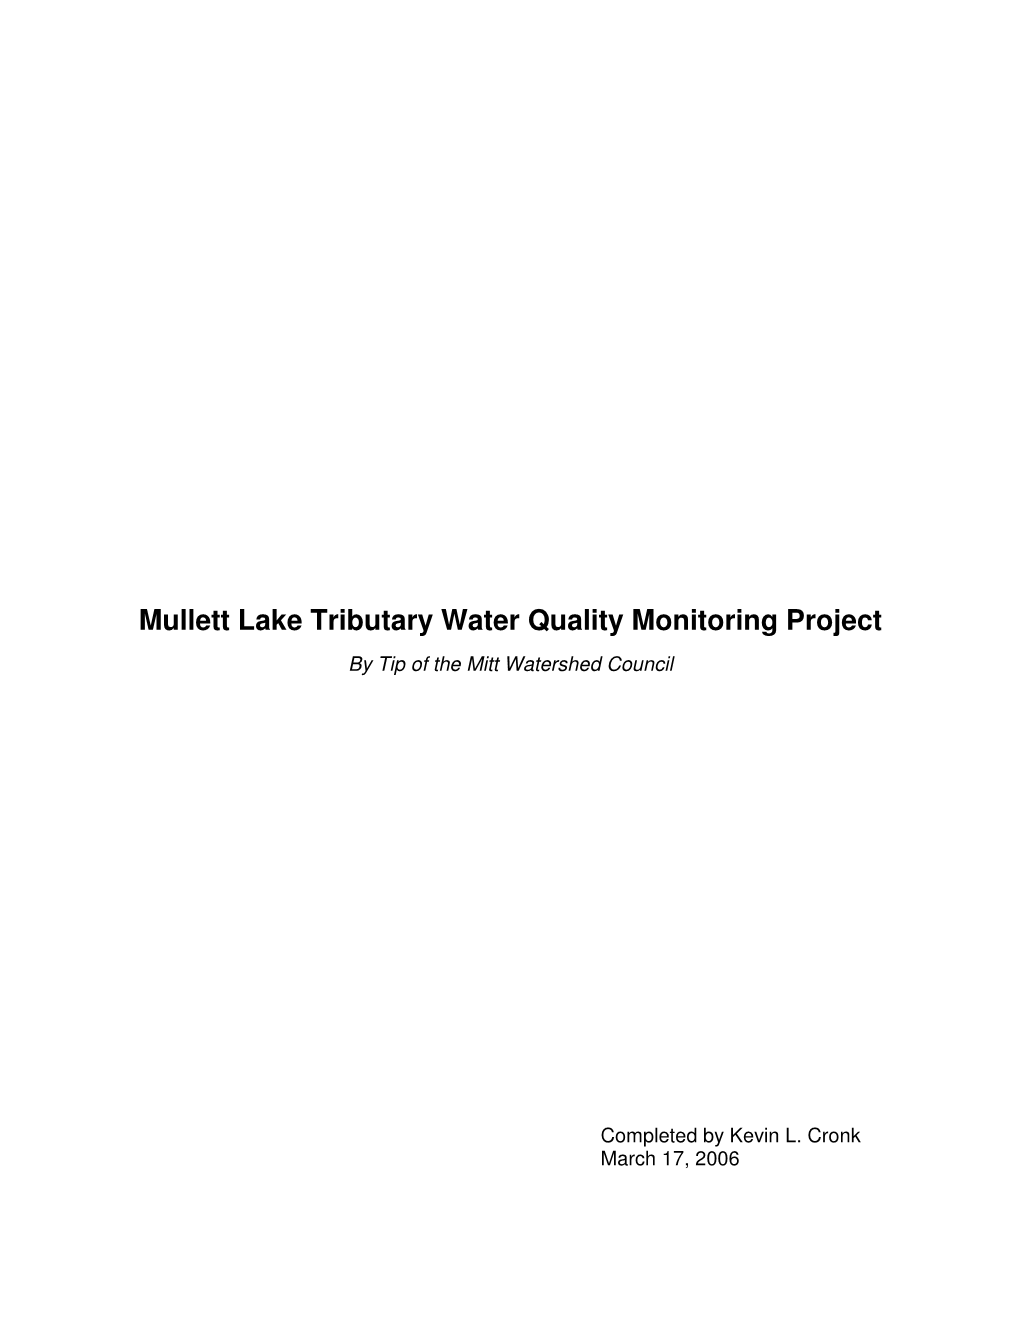 Mullett Lake Tributary Water Quality Monitoring Report